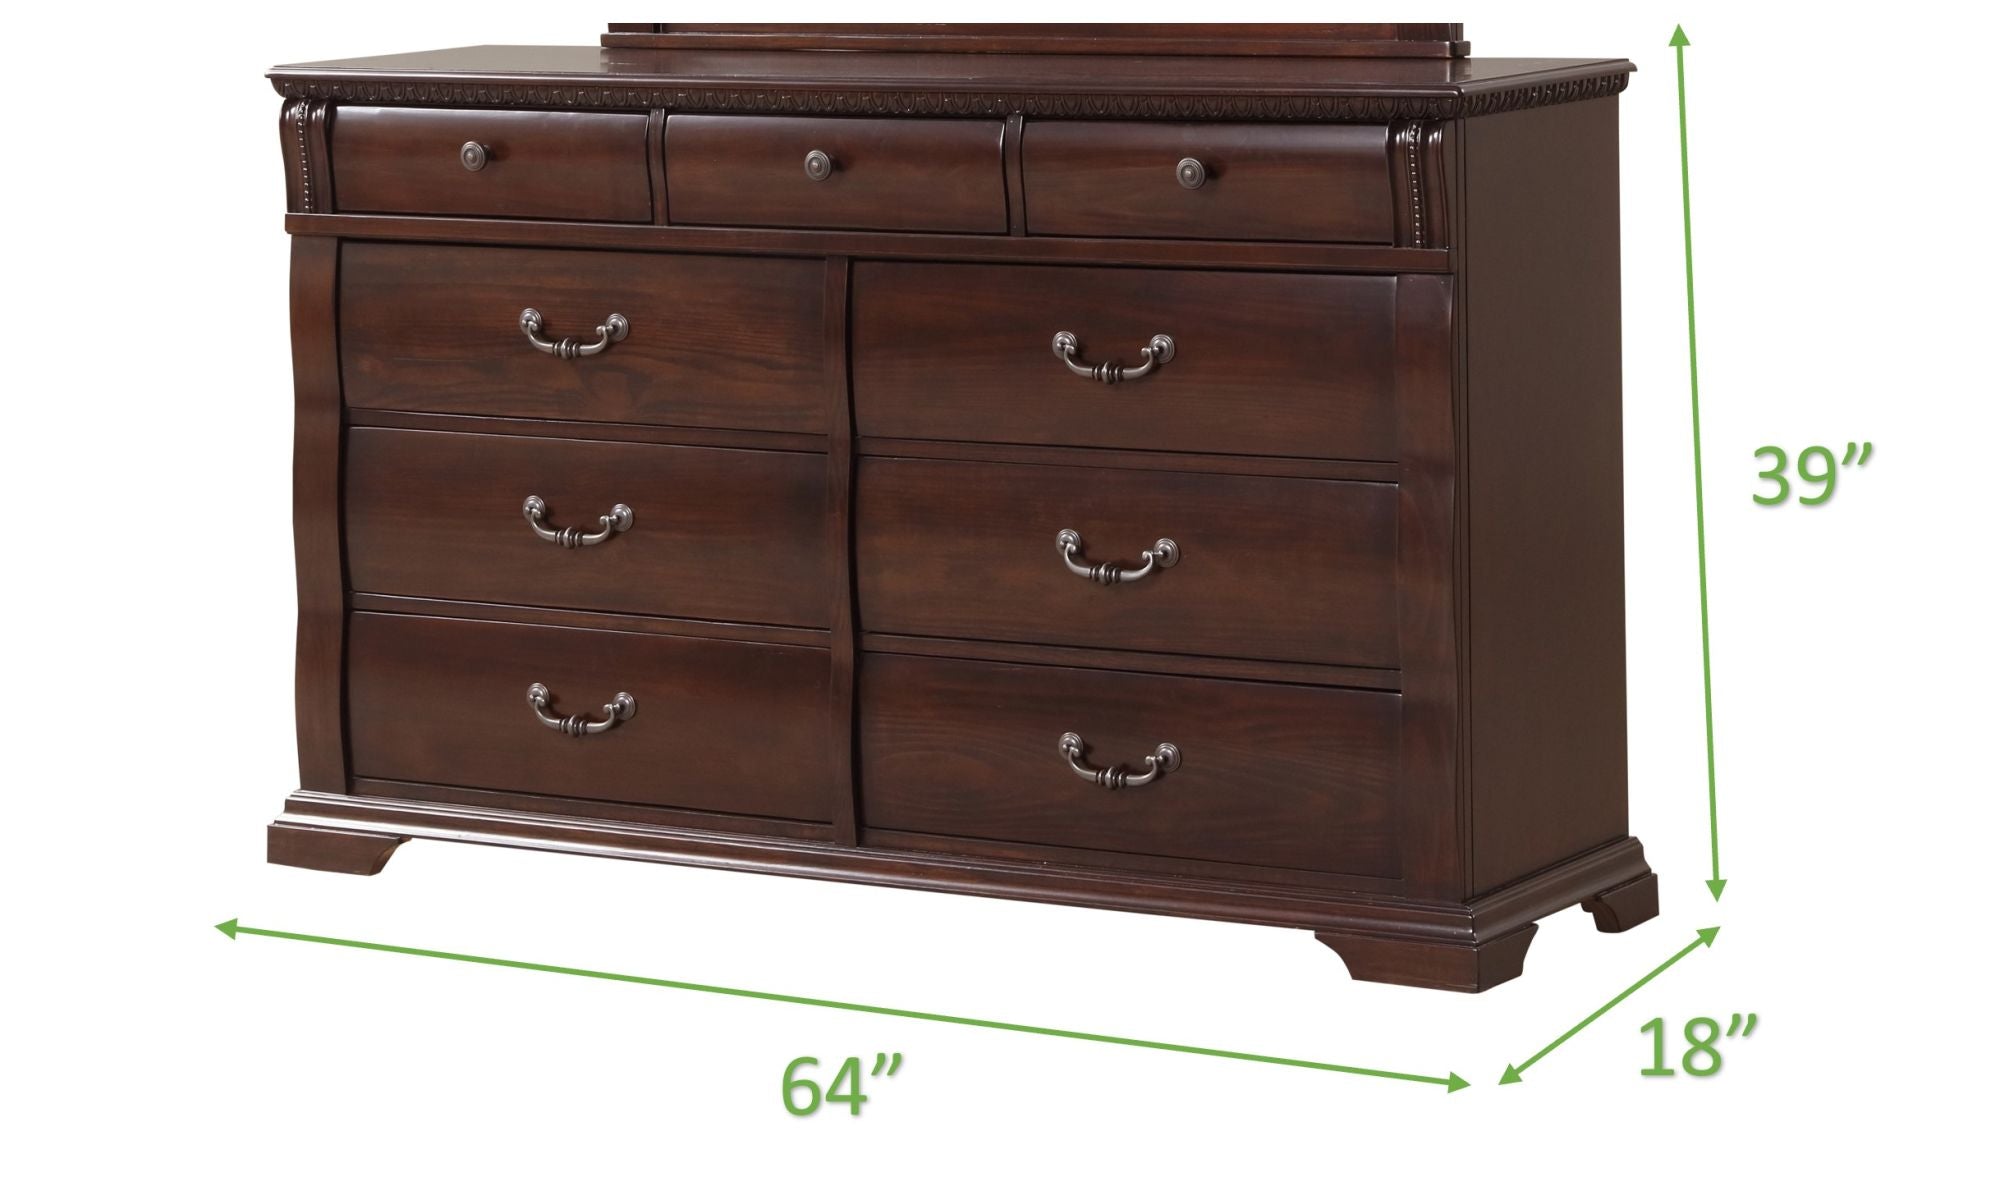 Aspen Queen 4 Pc Traditional Bedroom set made with Wood in Cherry